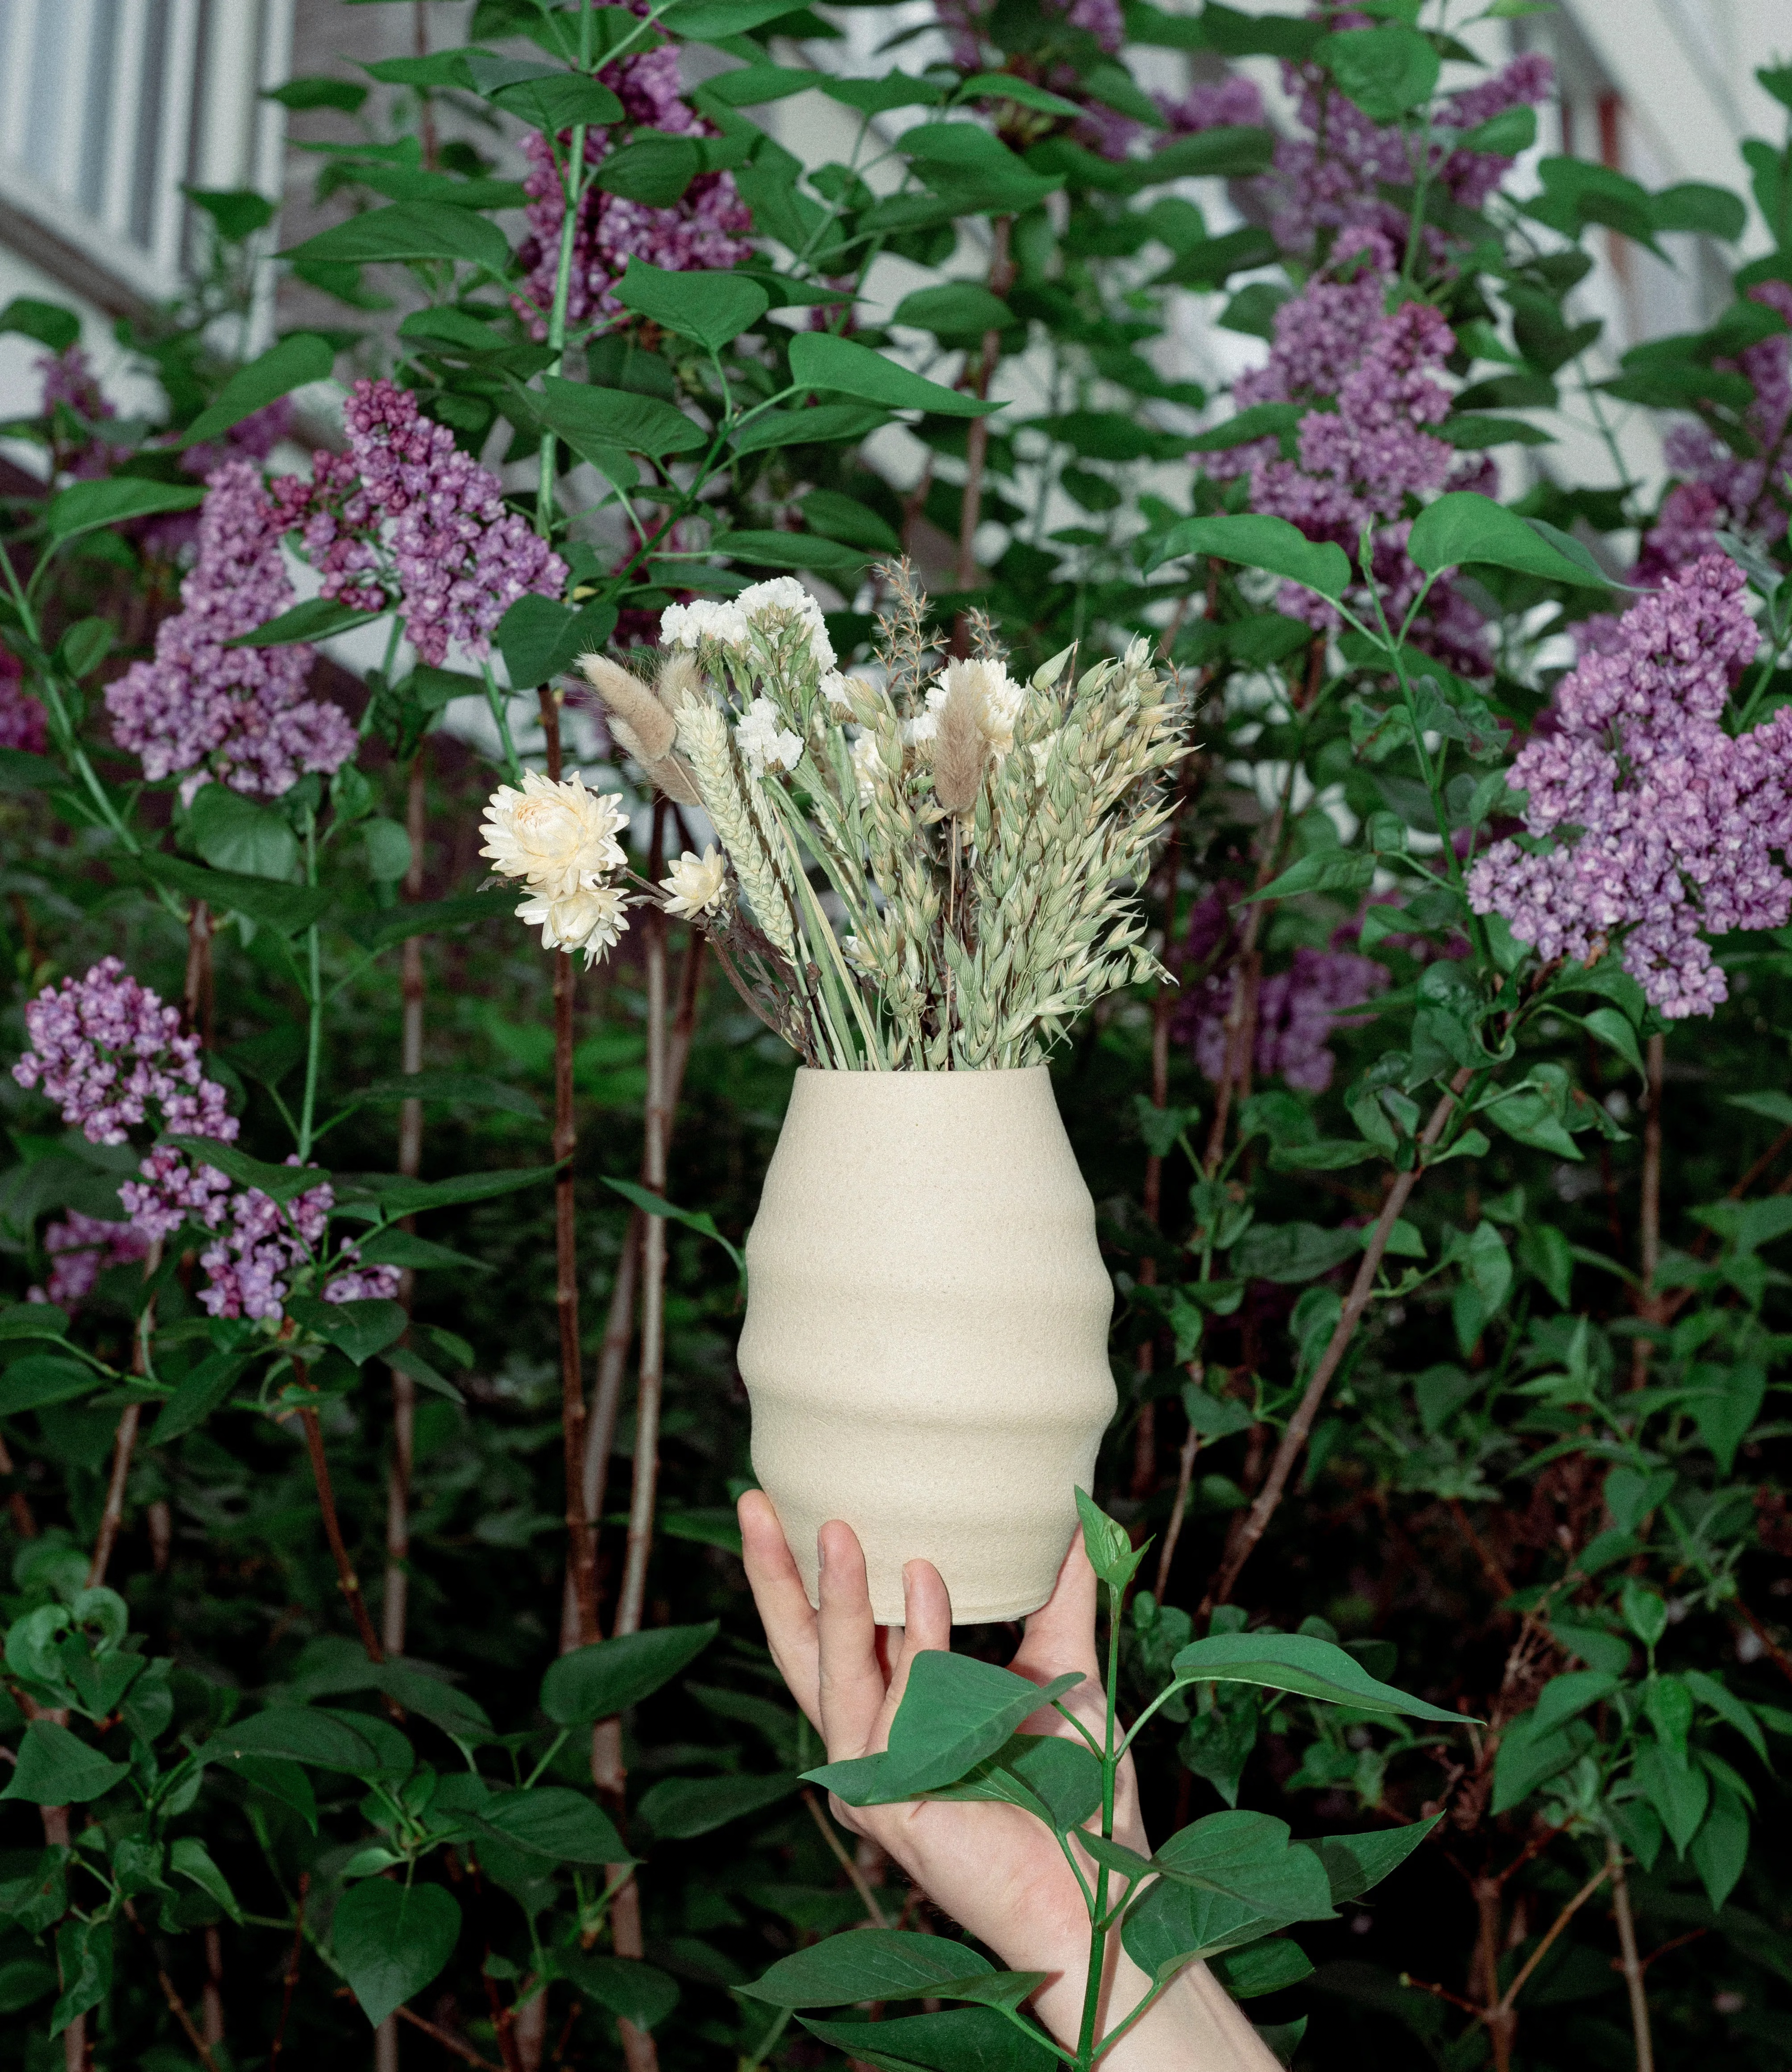 This is a picture of Aonia Vase in the nature hold by a hand. In the background there are lilac flowers and in the vase there is a dried flower bouquet.